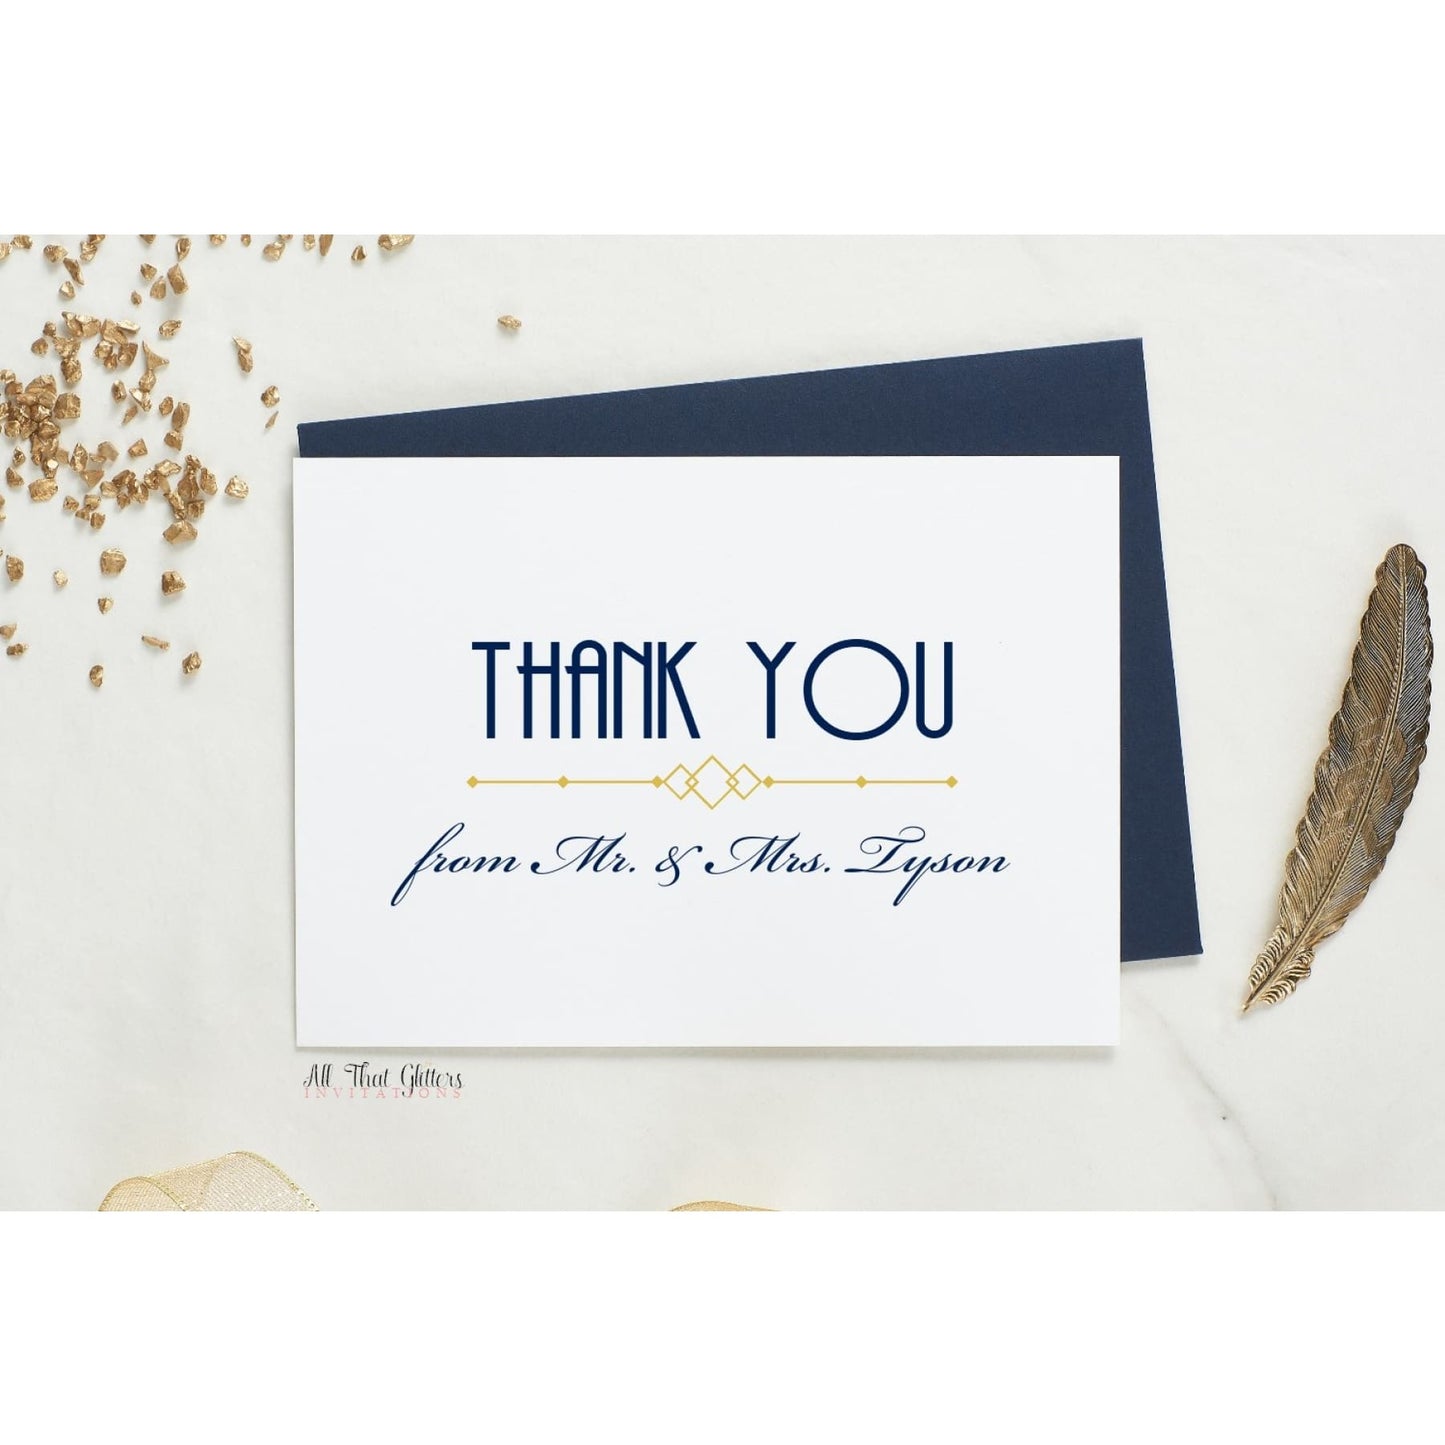 Folded Thank You Card, Art-Deco Style 2 - All That Glitters Invitations